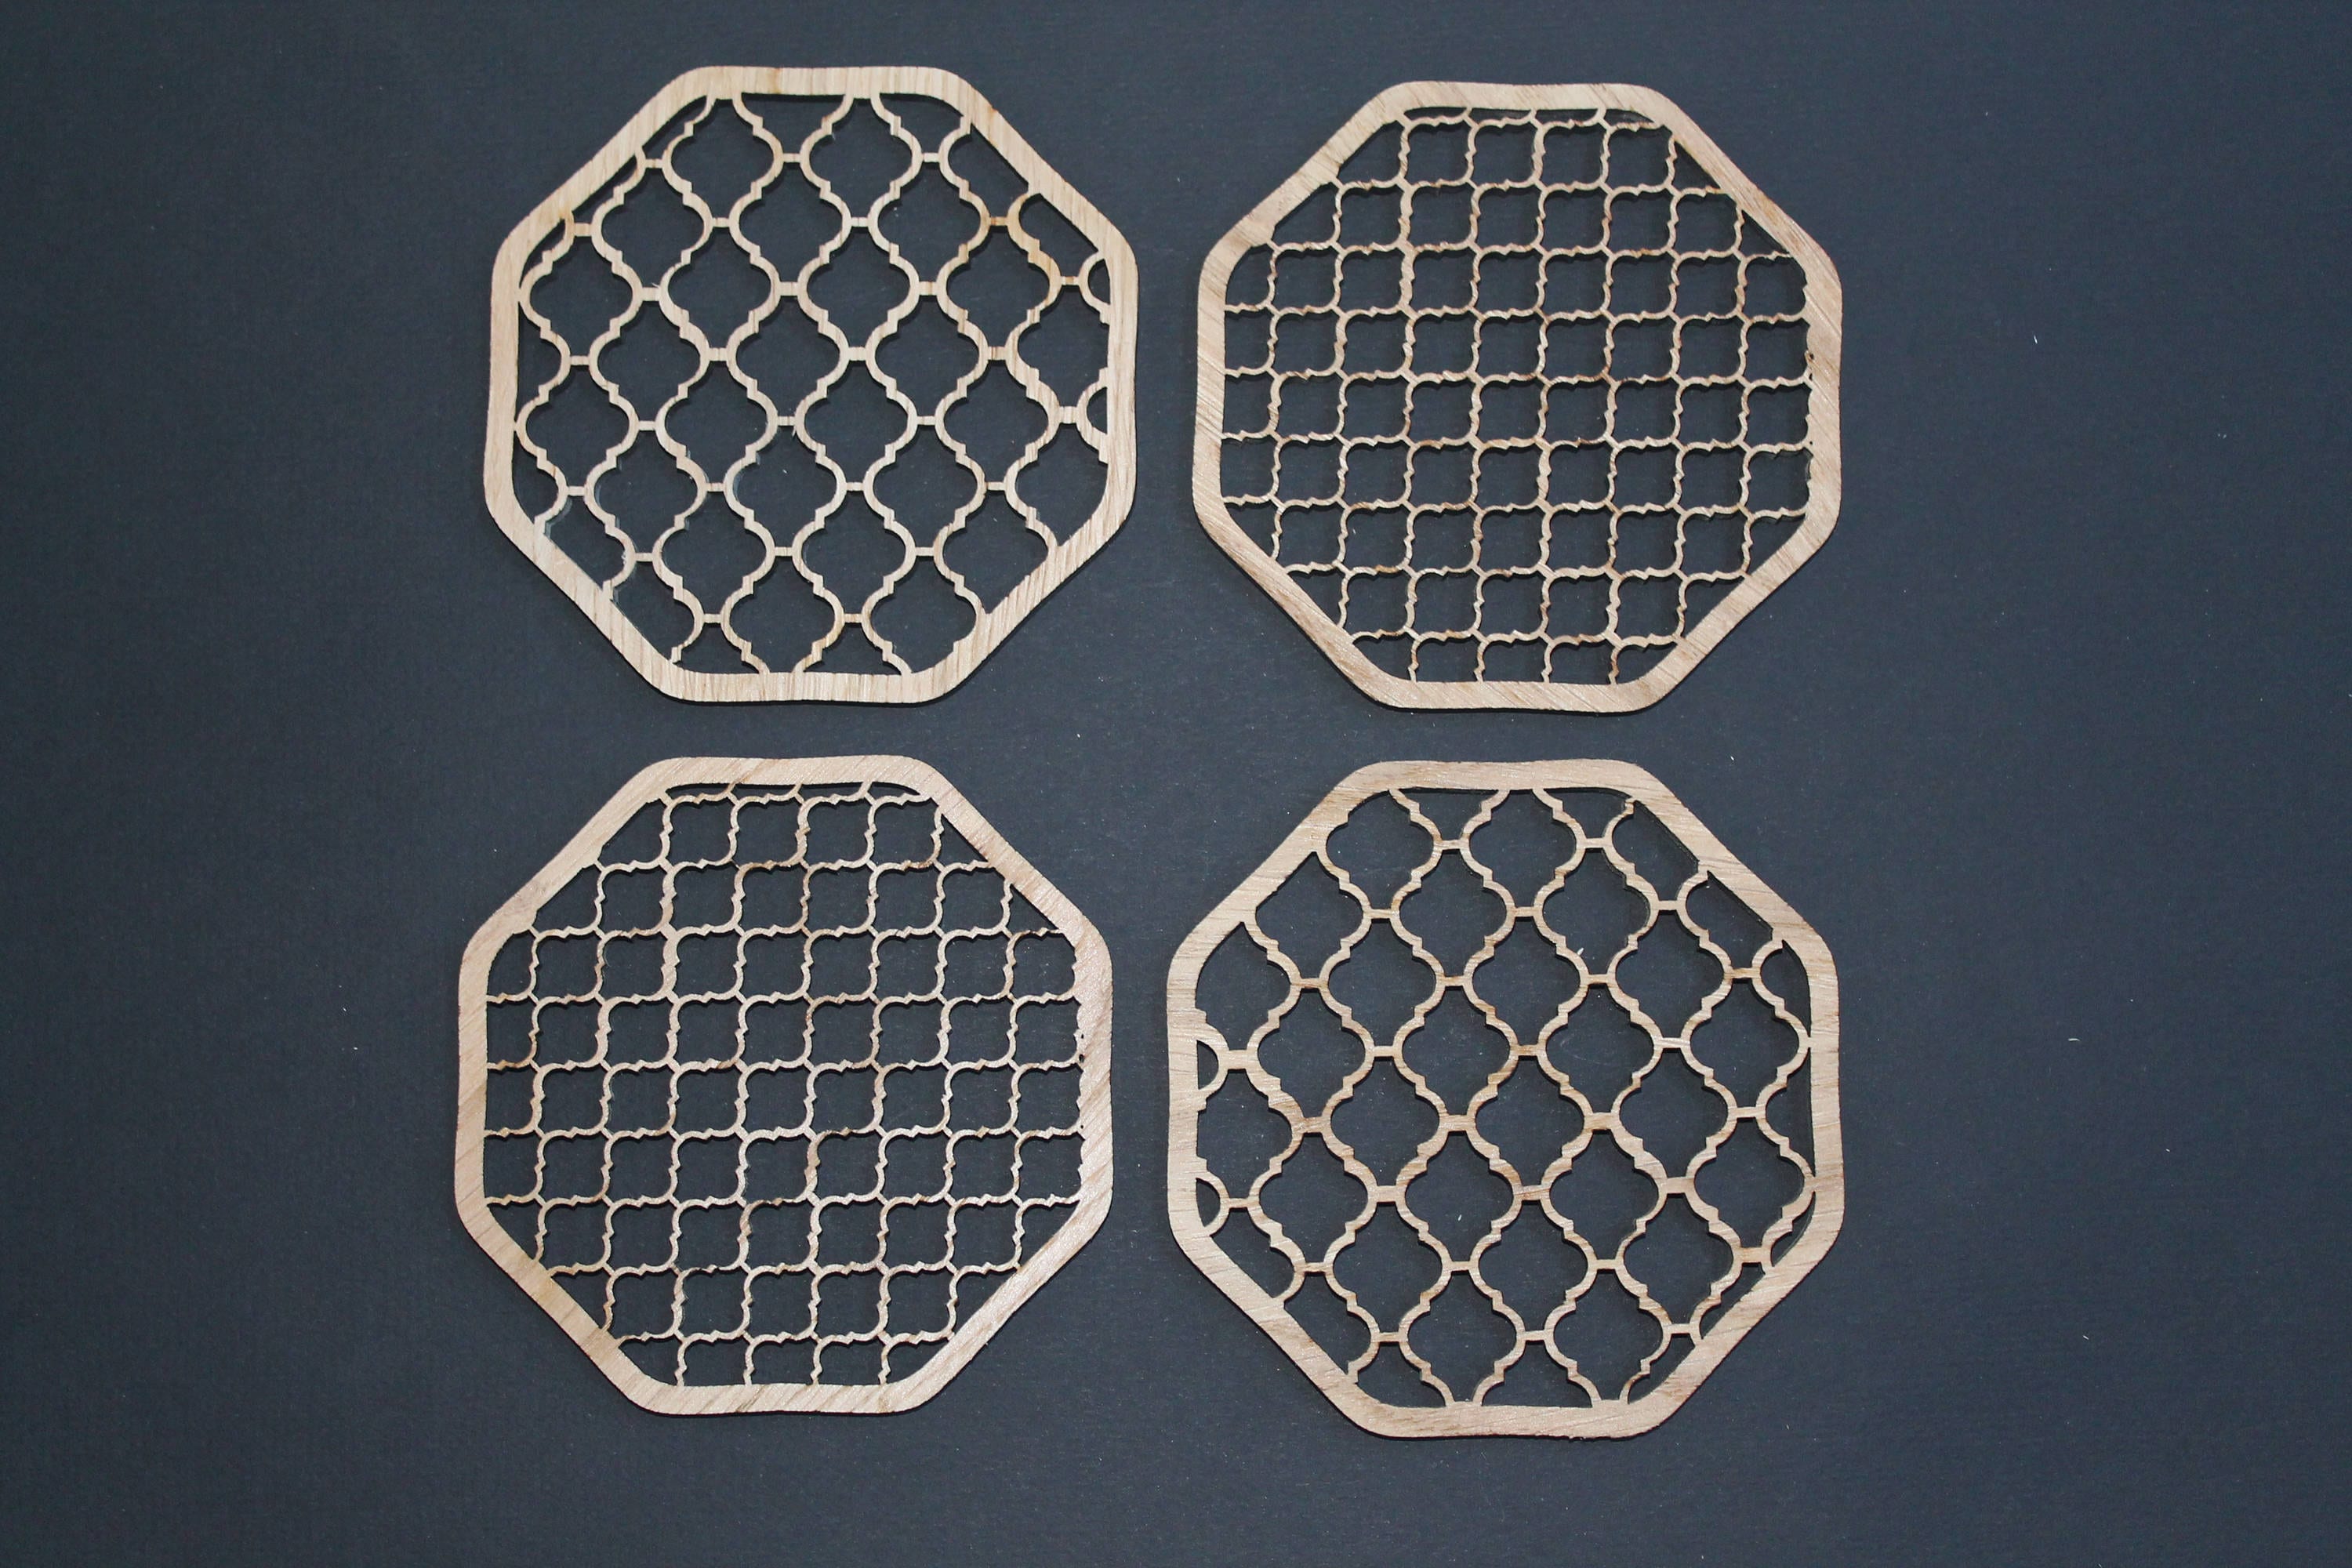 Moroccan Style Coasters - Set of 4 - Islamic Moroccan Patterns